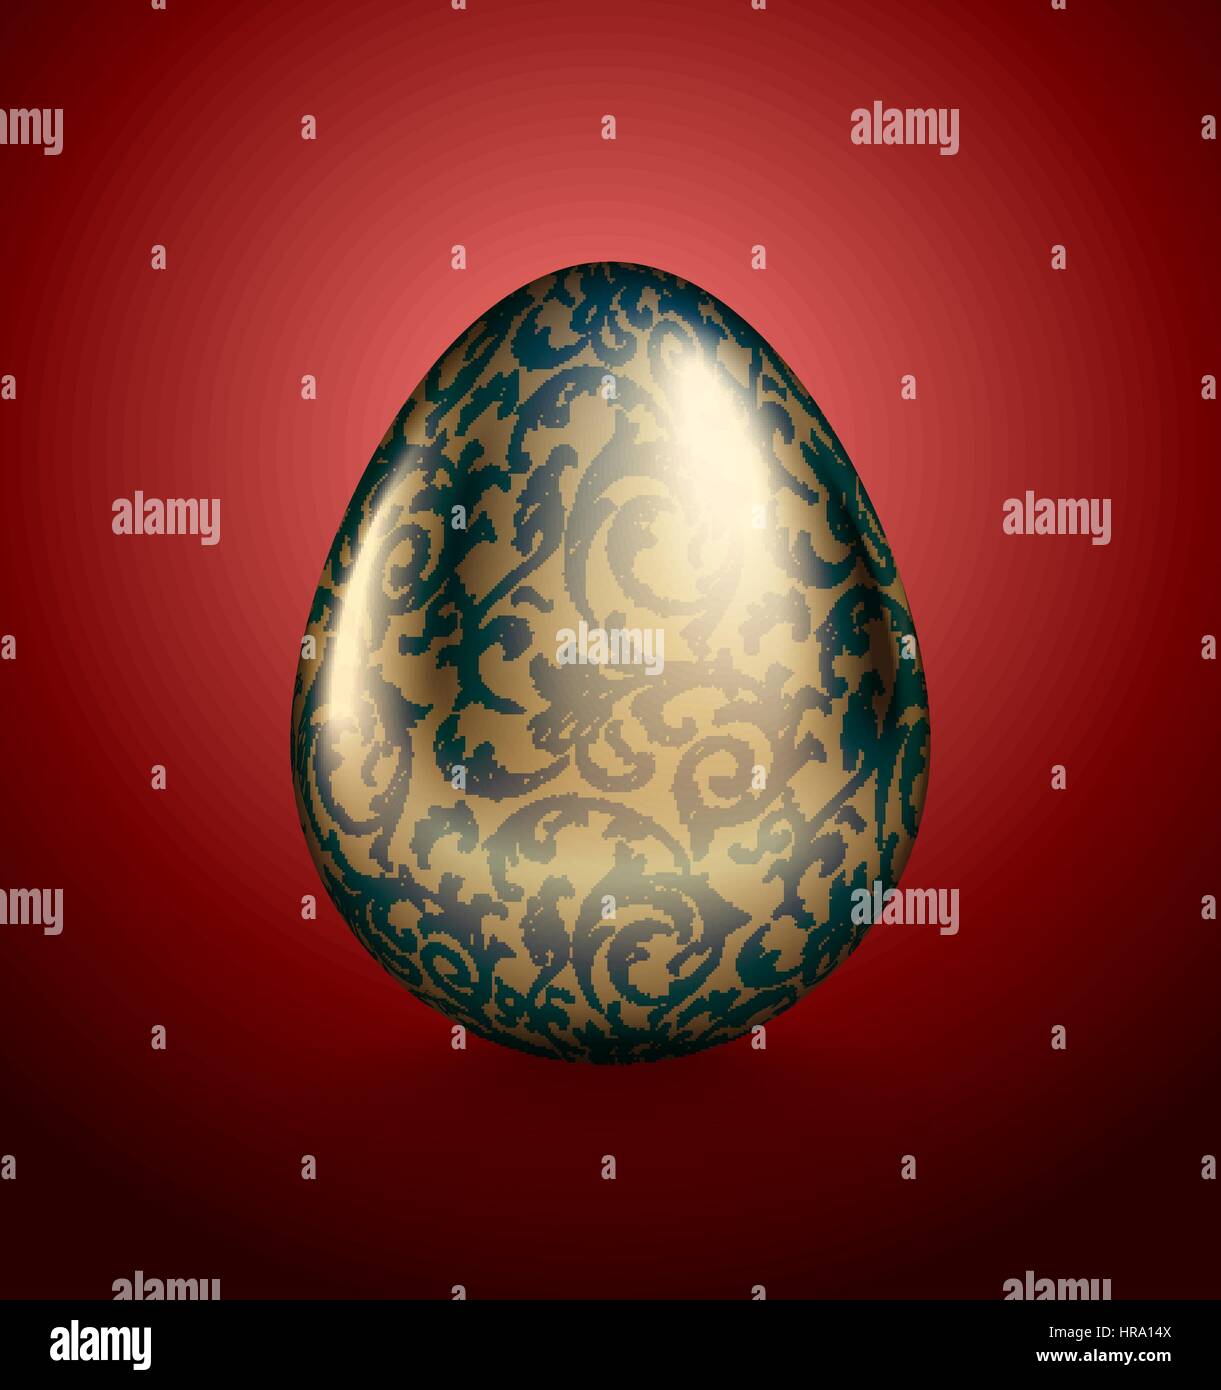 Glossy realistic golden egg with blue ink handdrawn floral pattern. Isolated on red background. Vintage banner, card, poster for Easter Stock Vector